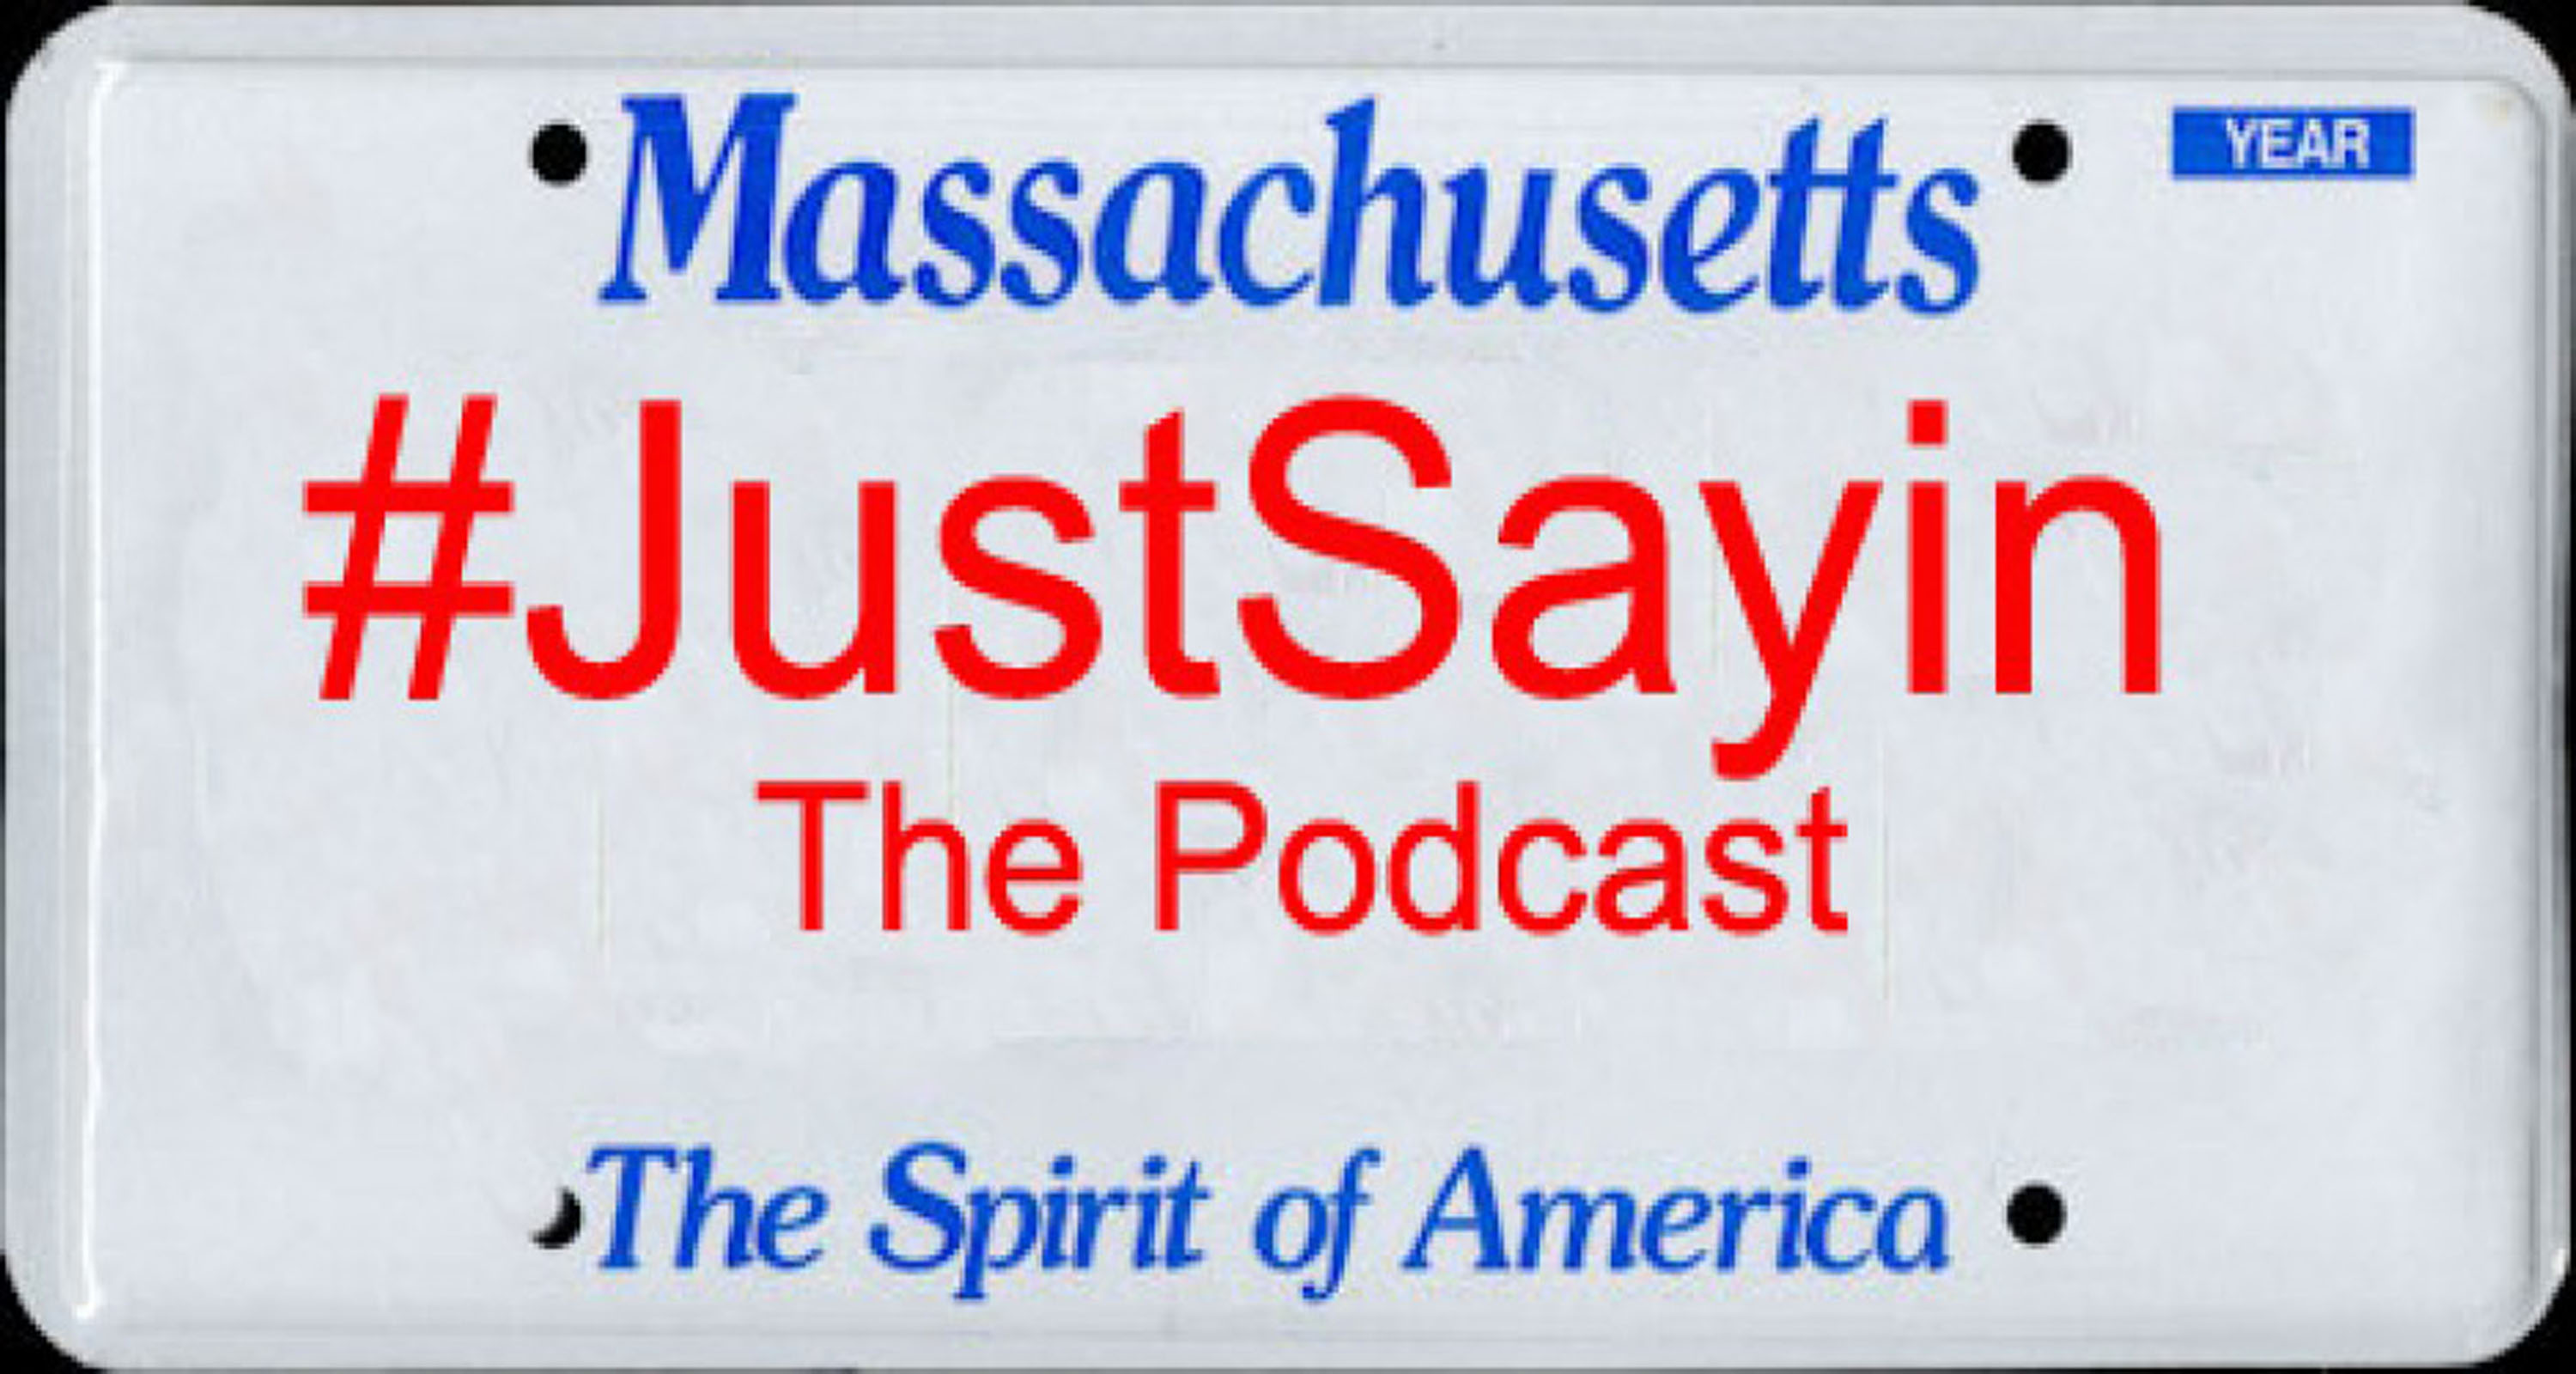 Hashtag Just Sayin' - The Podcast